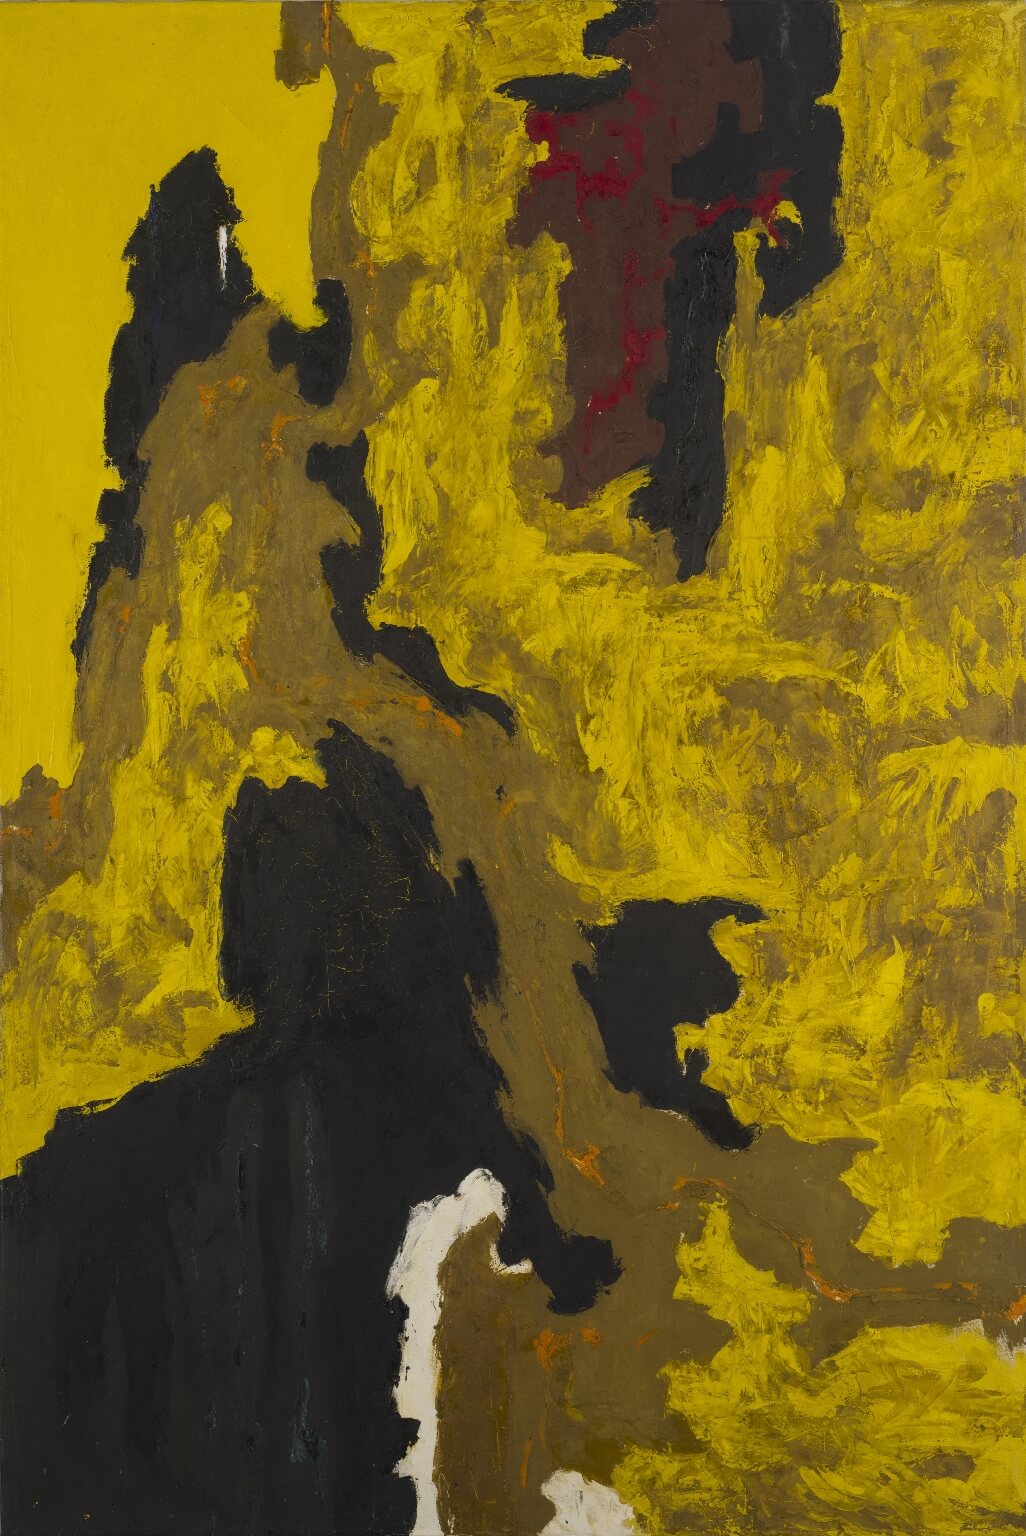 Abstract vertical painting with large sections of swirling yellow, and smaller sections of black, tan, and red